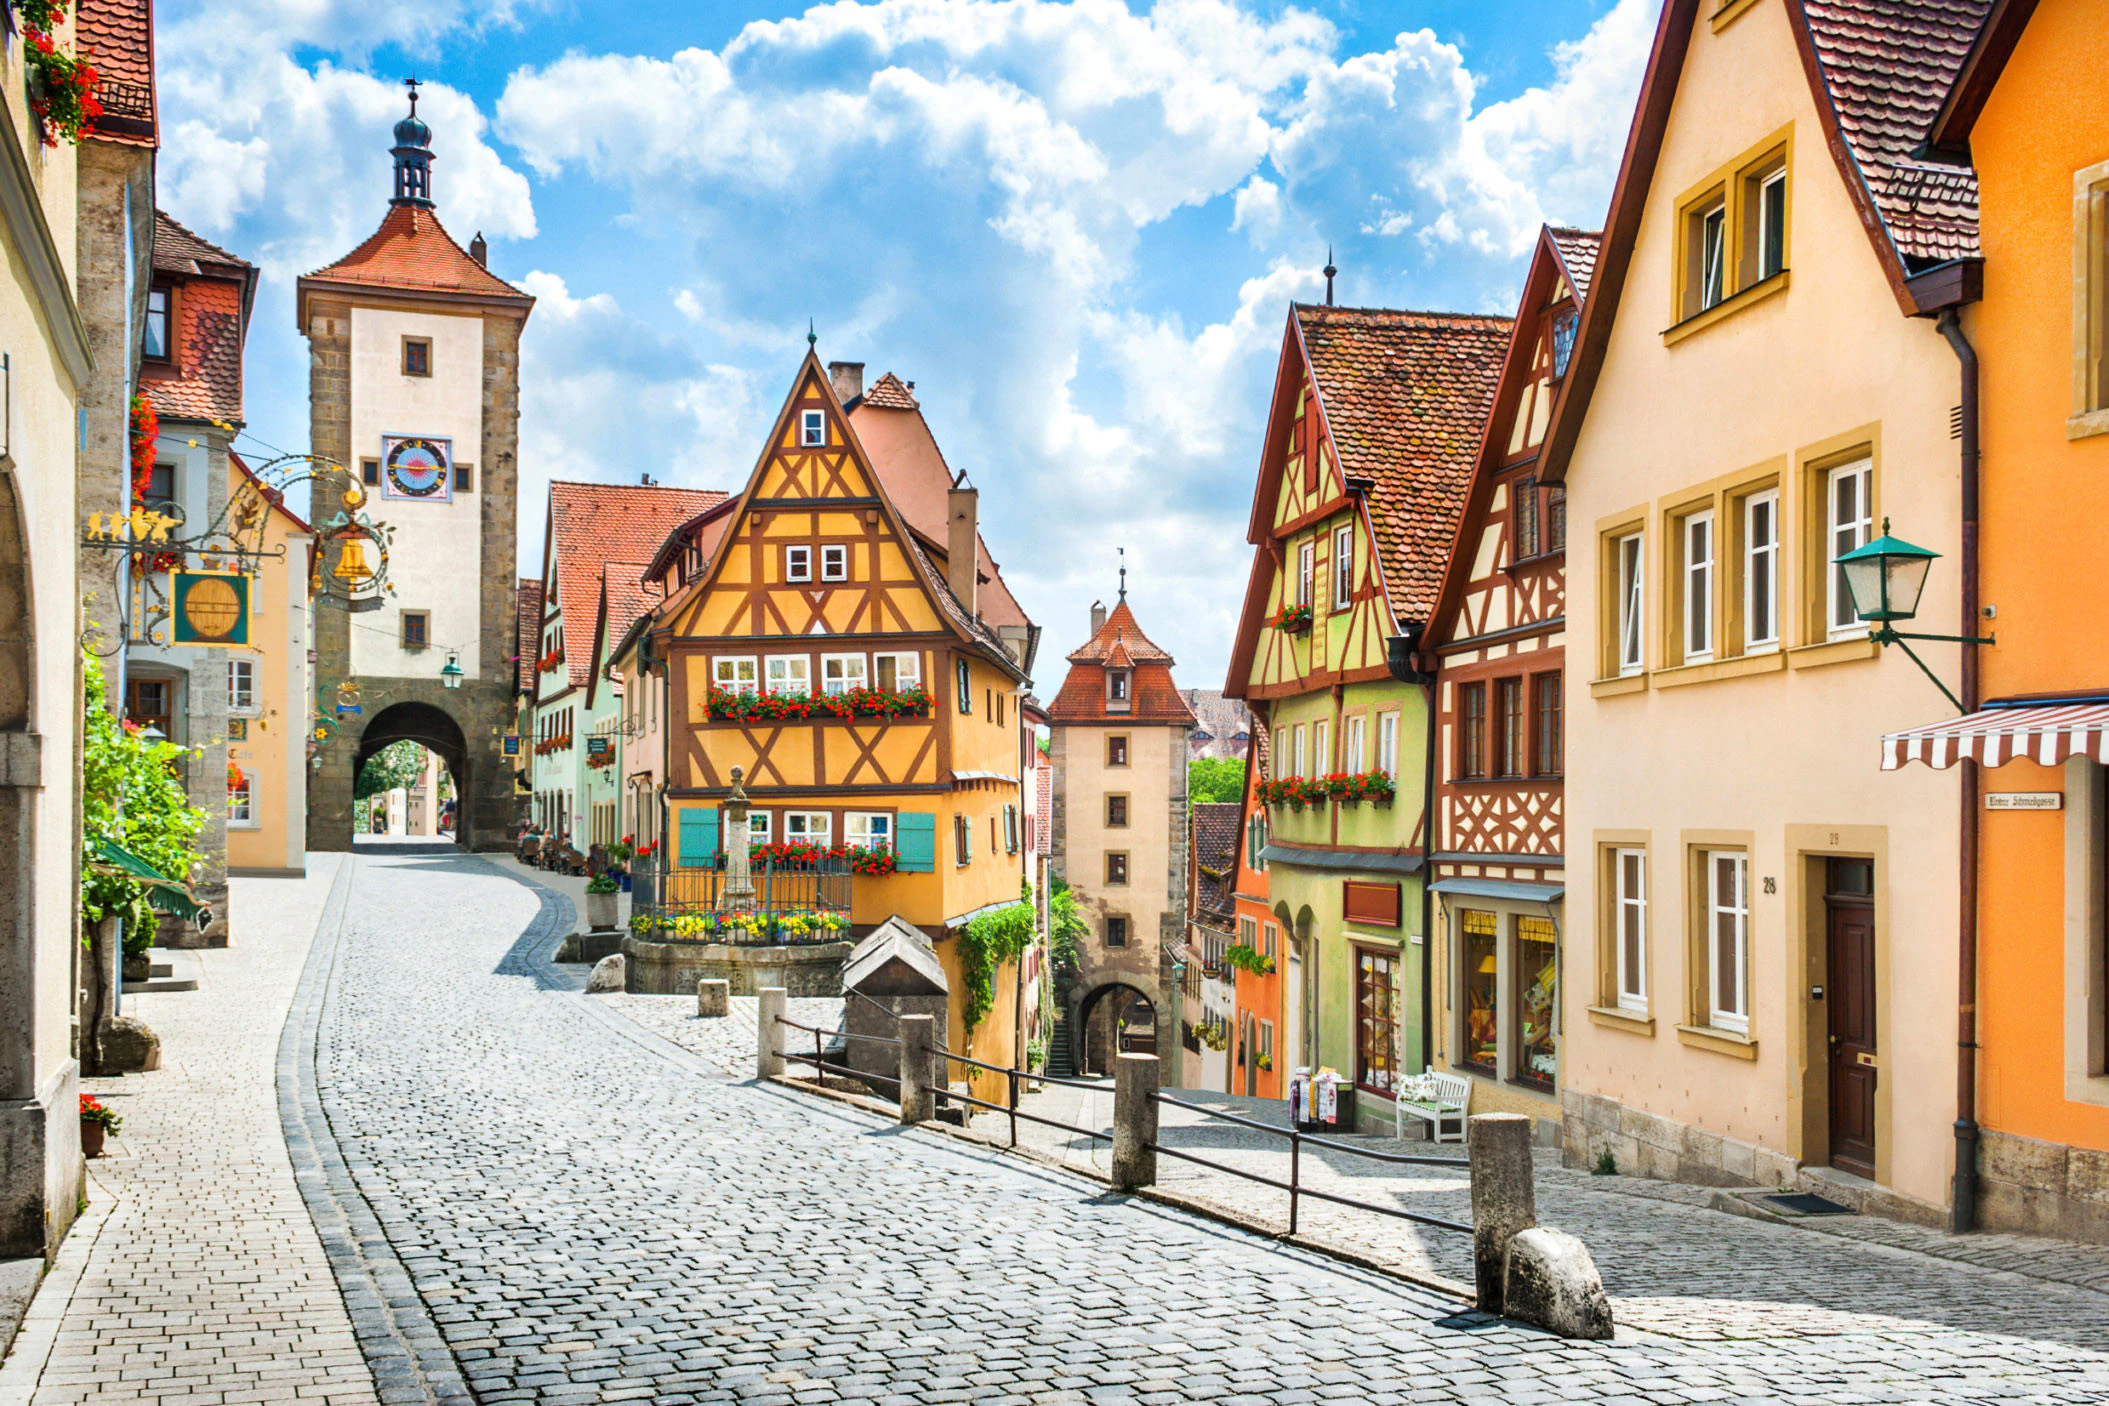 30 interesting facts about Germany